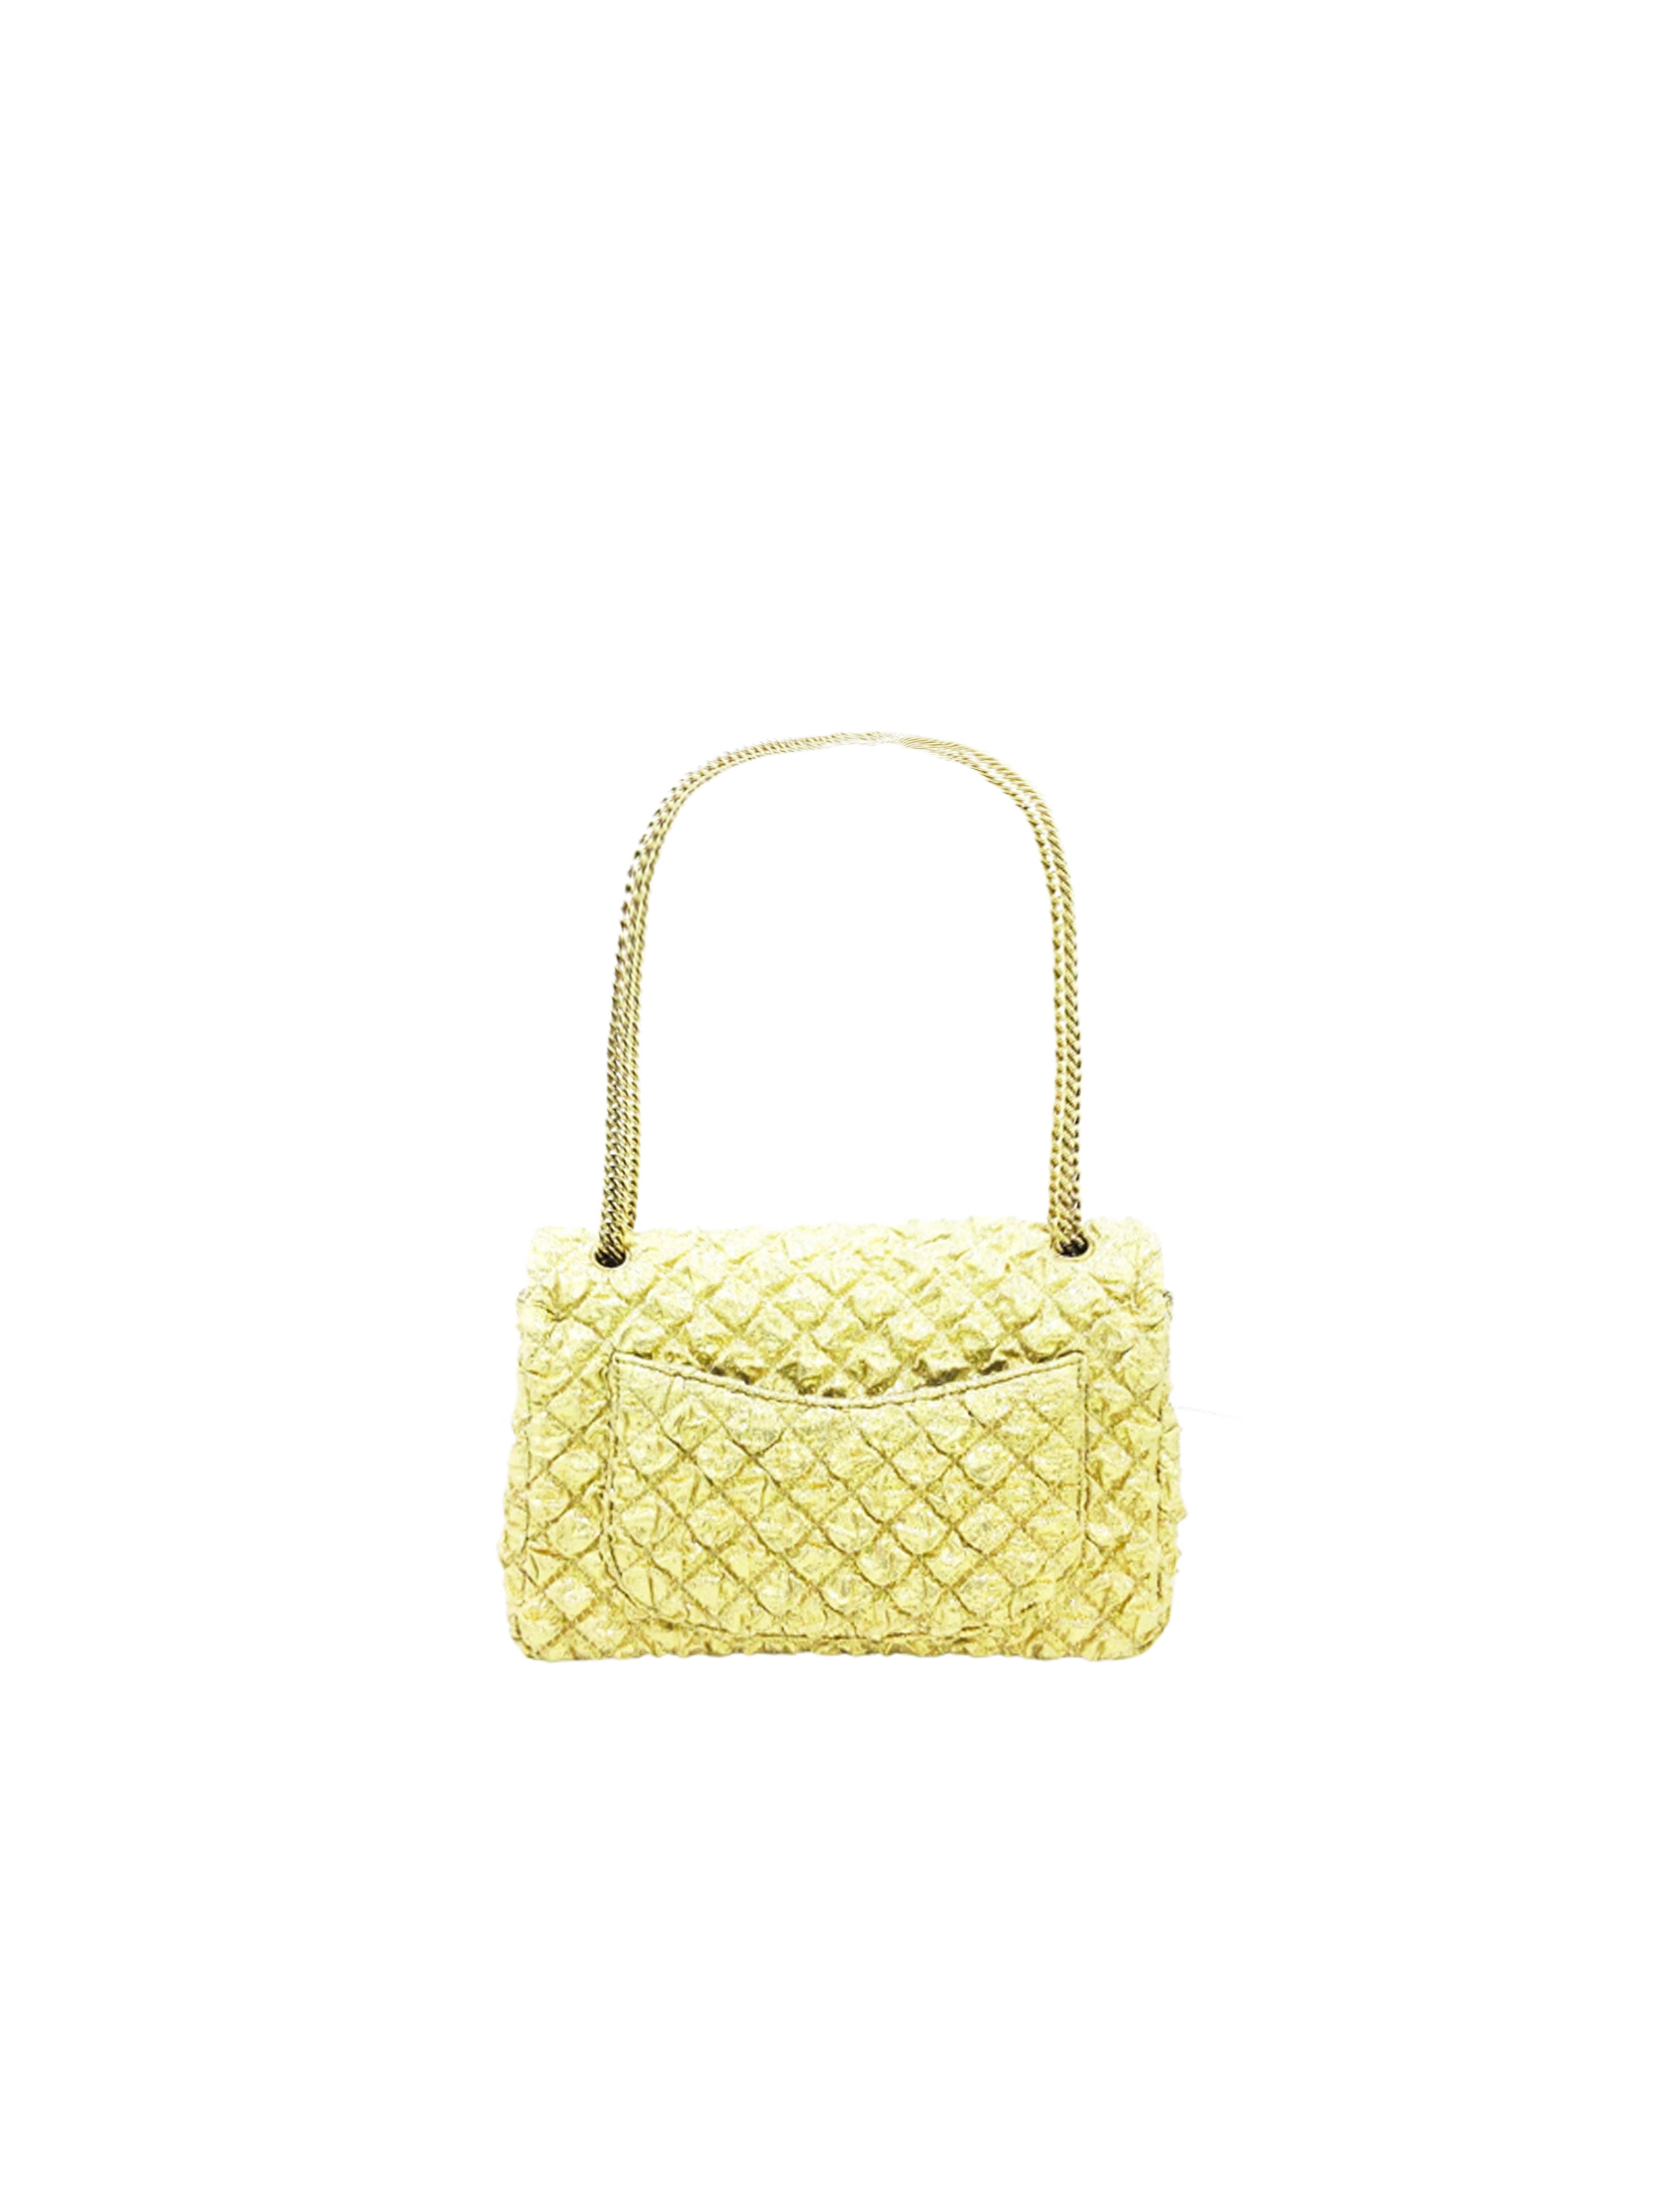 Chanel Ruched Gold Rare Flap Bag · INTO